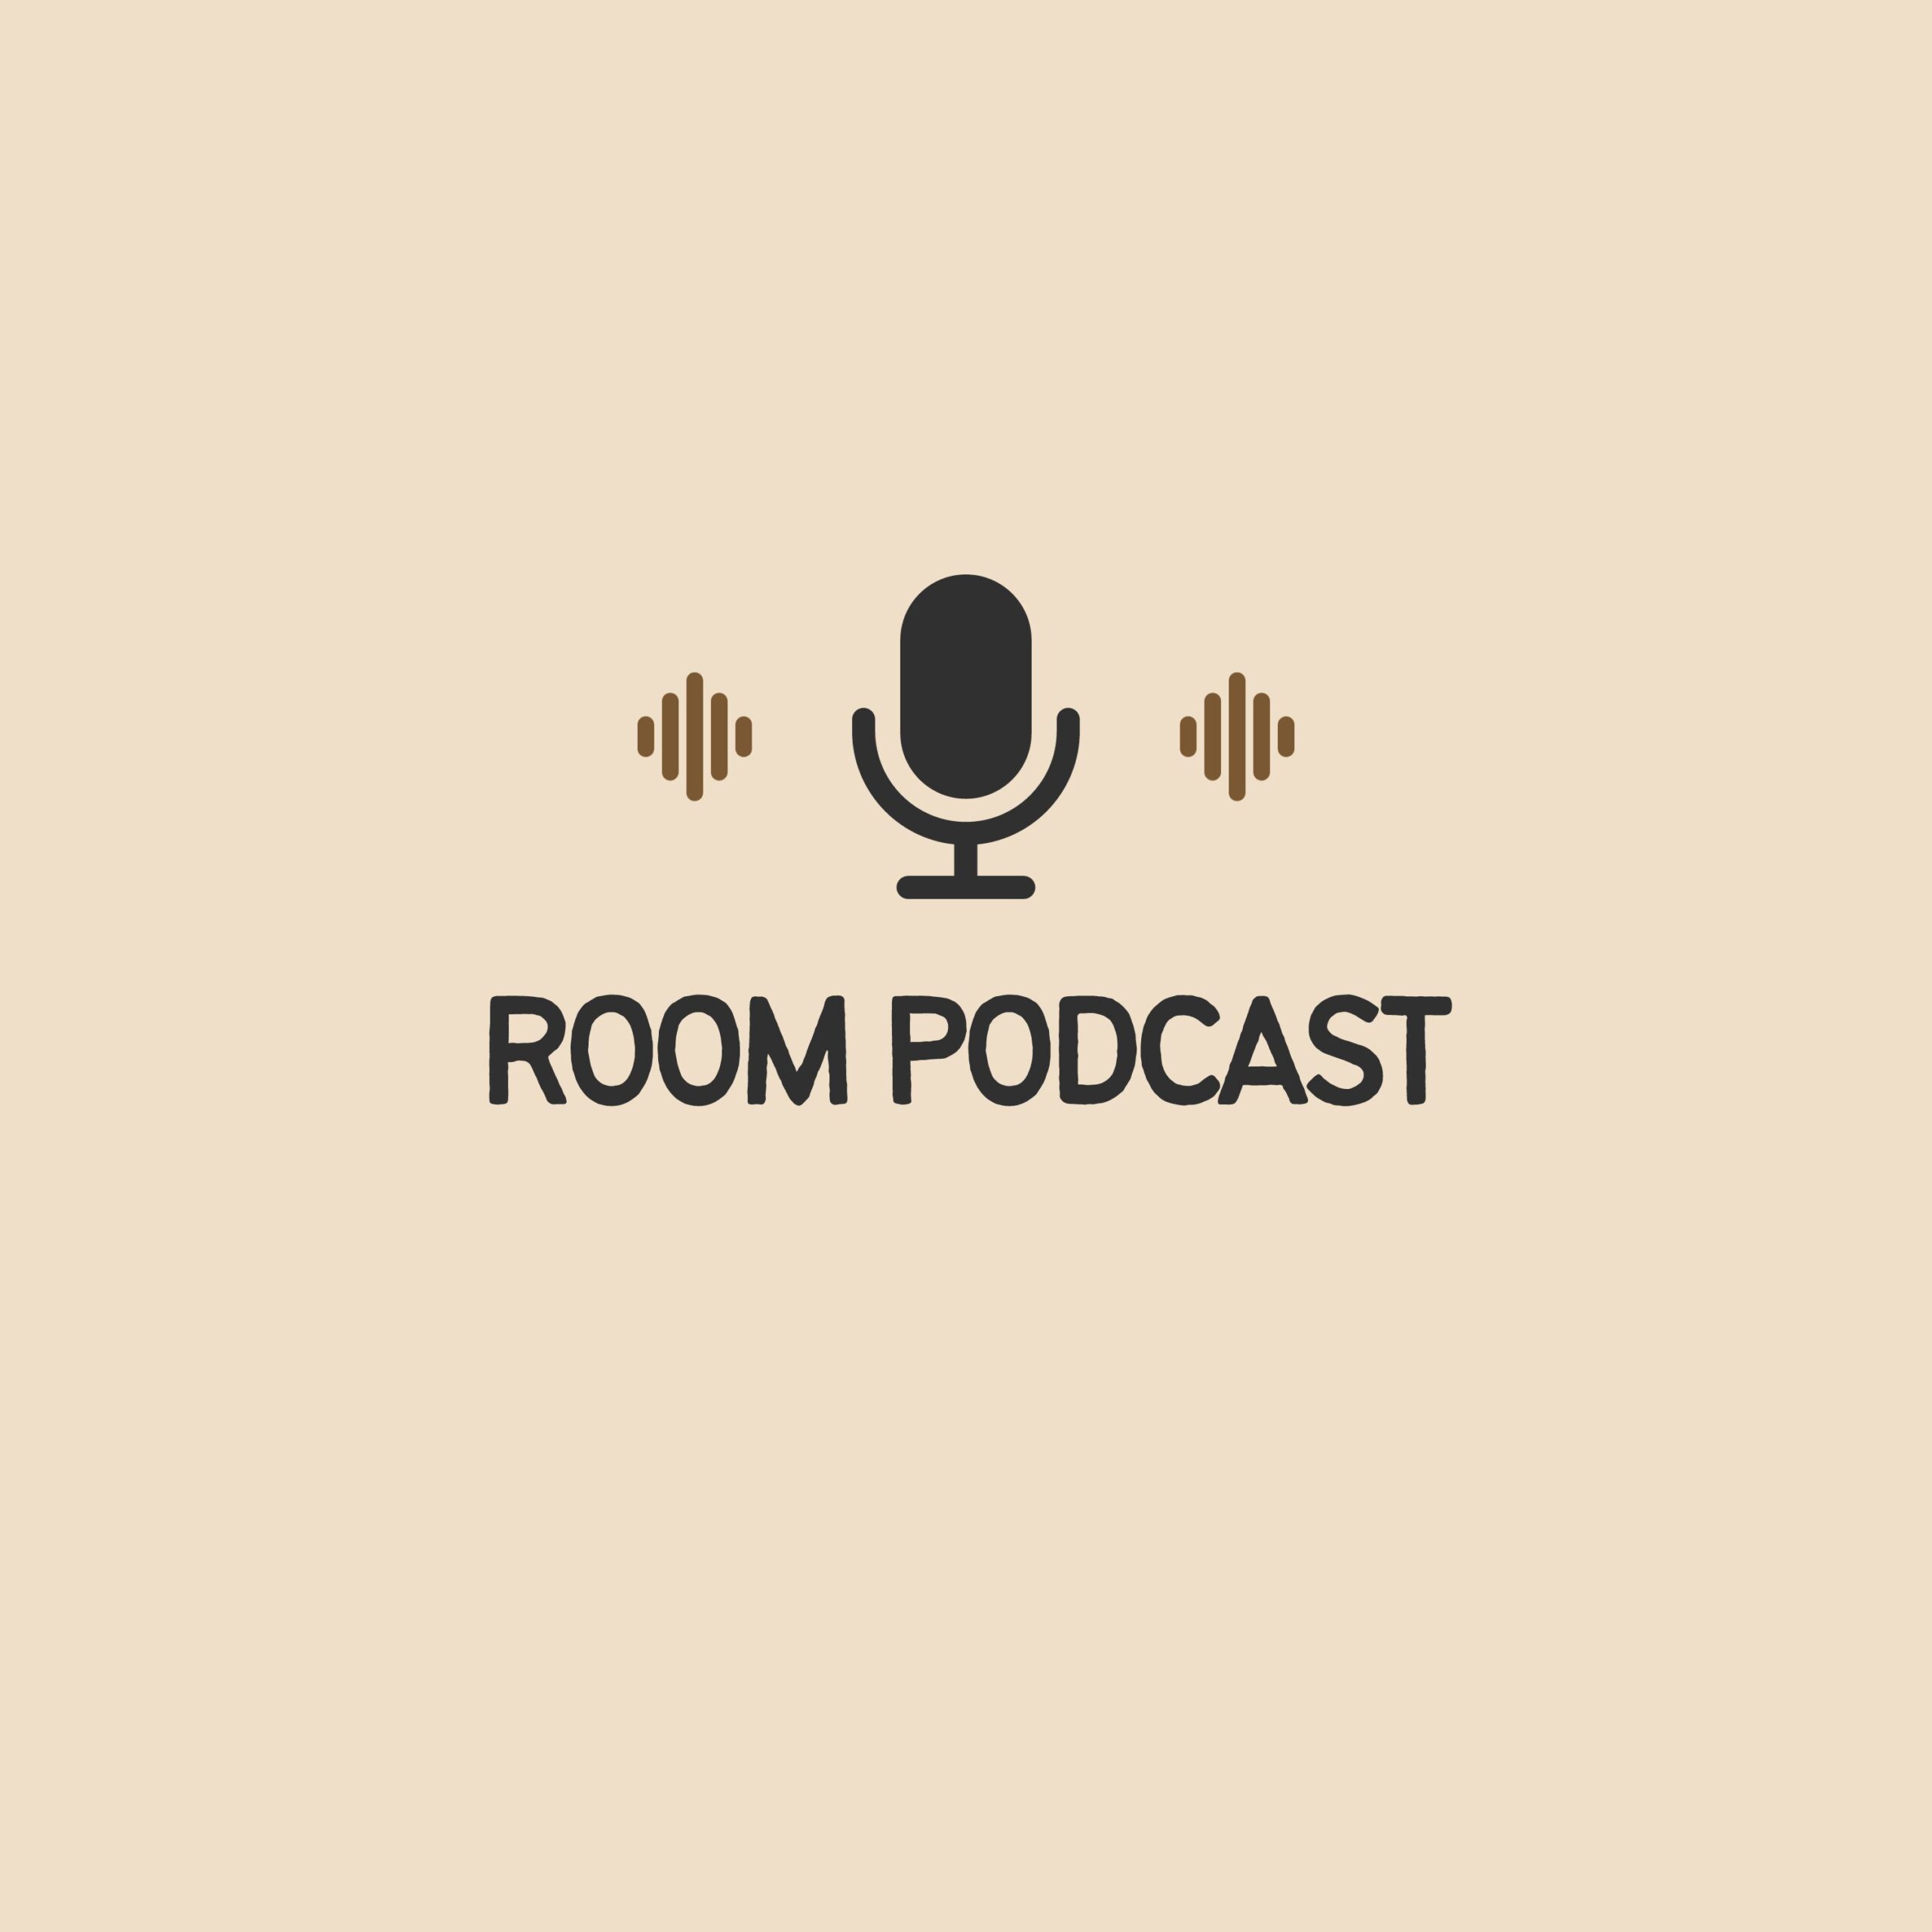 RoomPodcast.com domains for sale